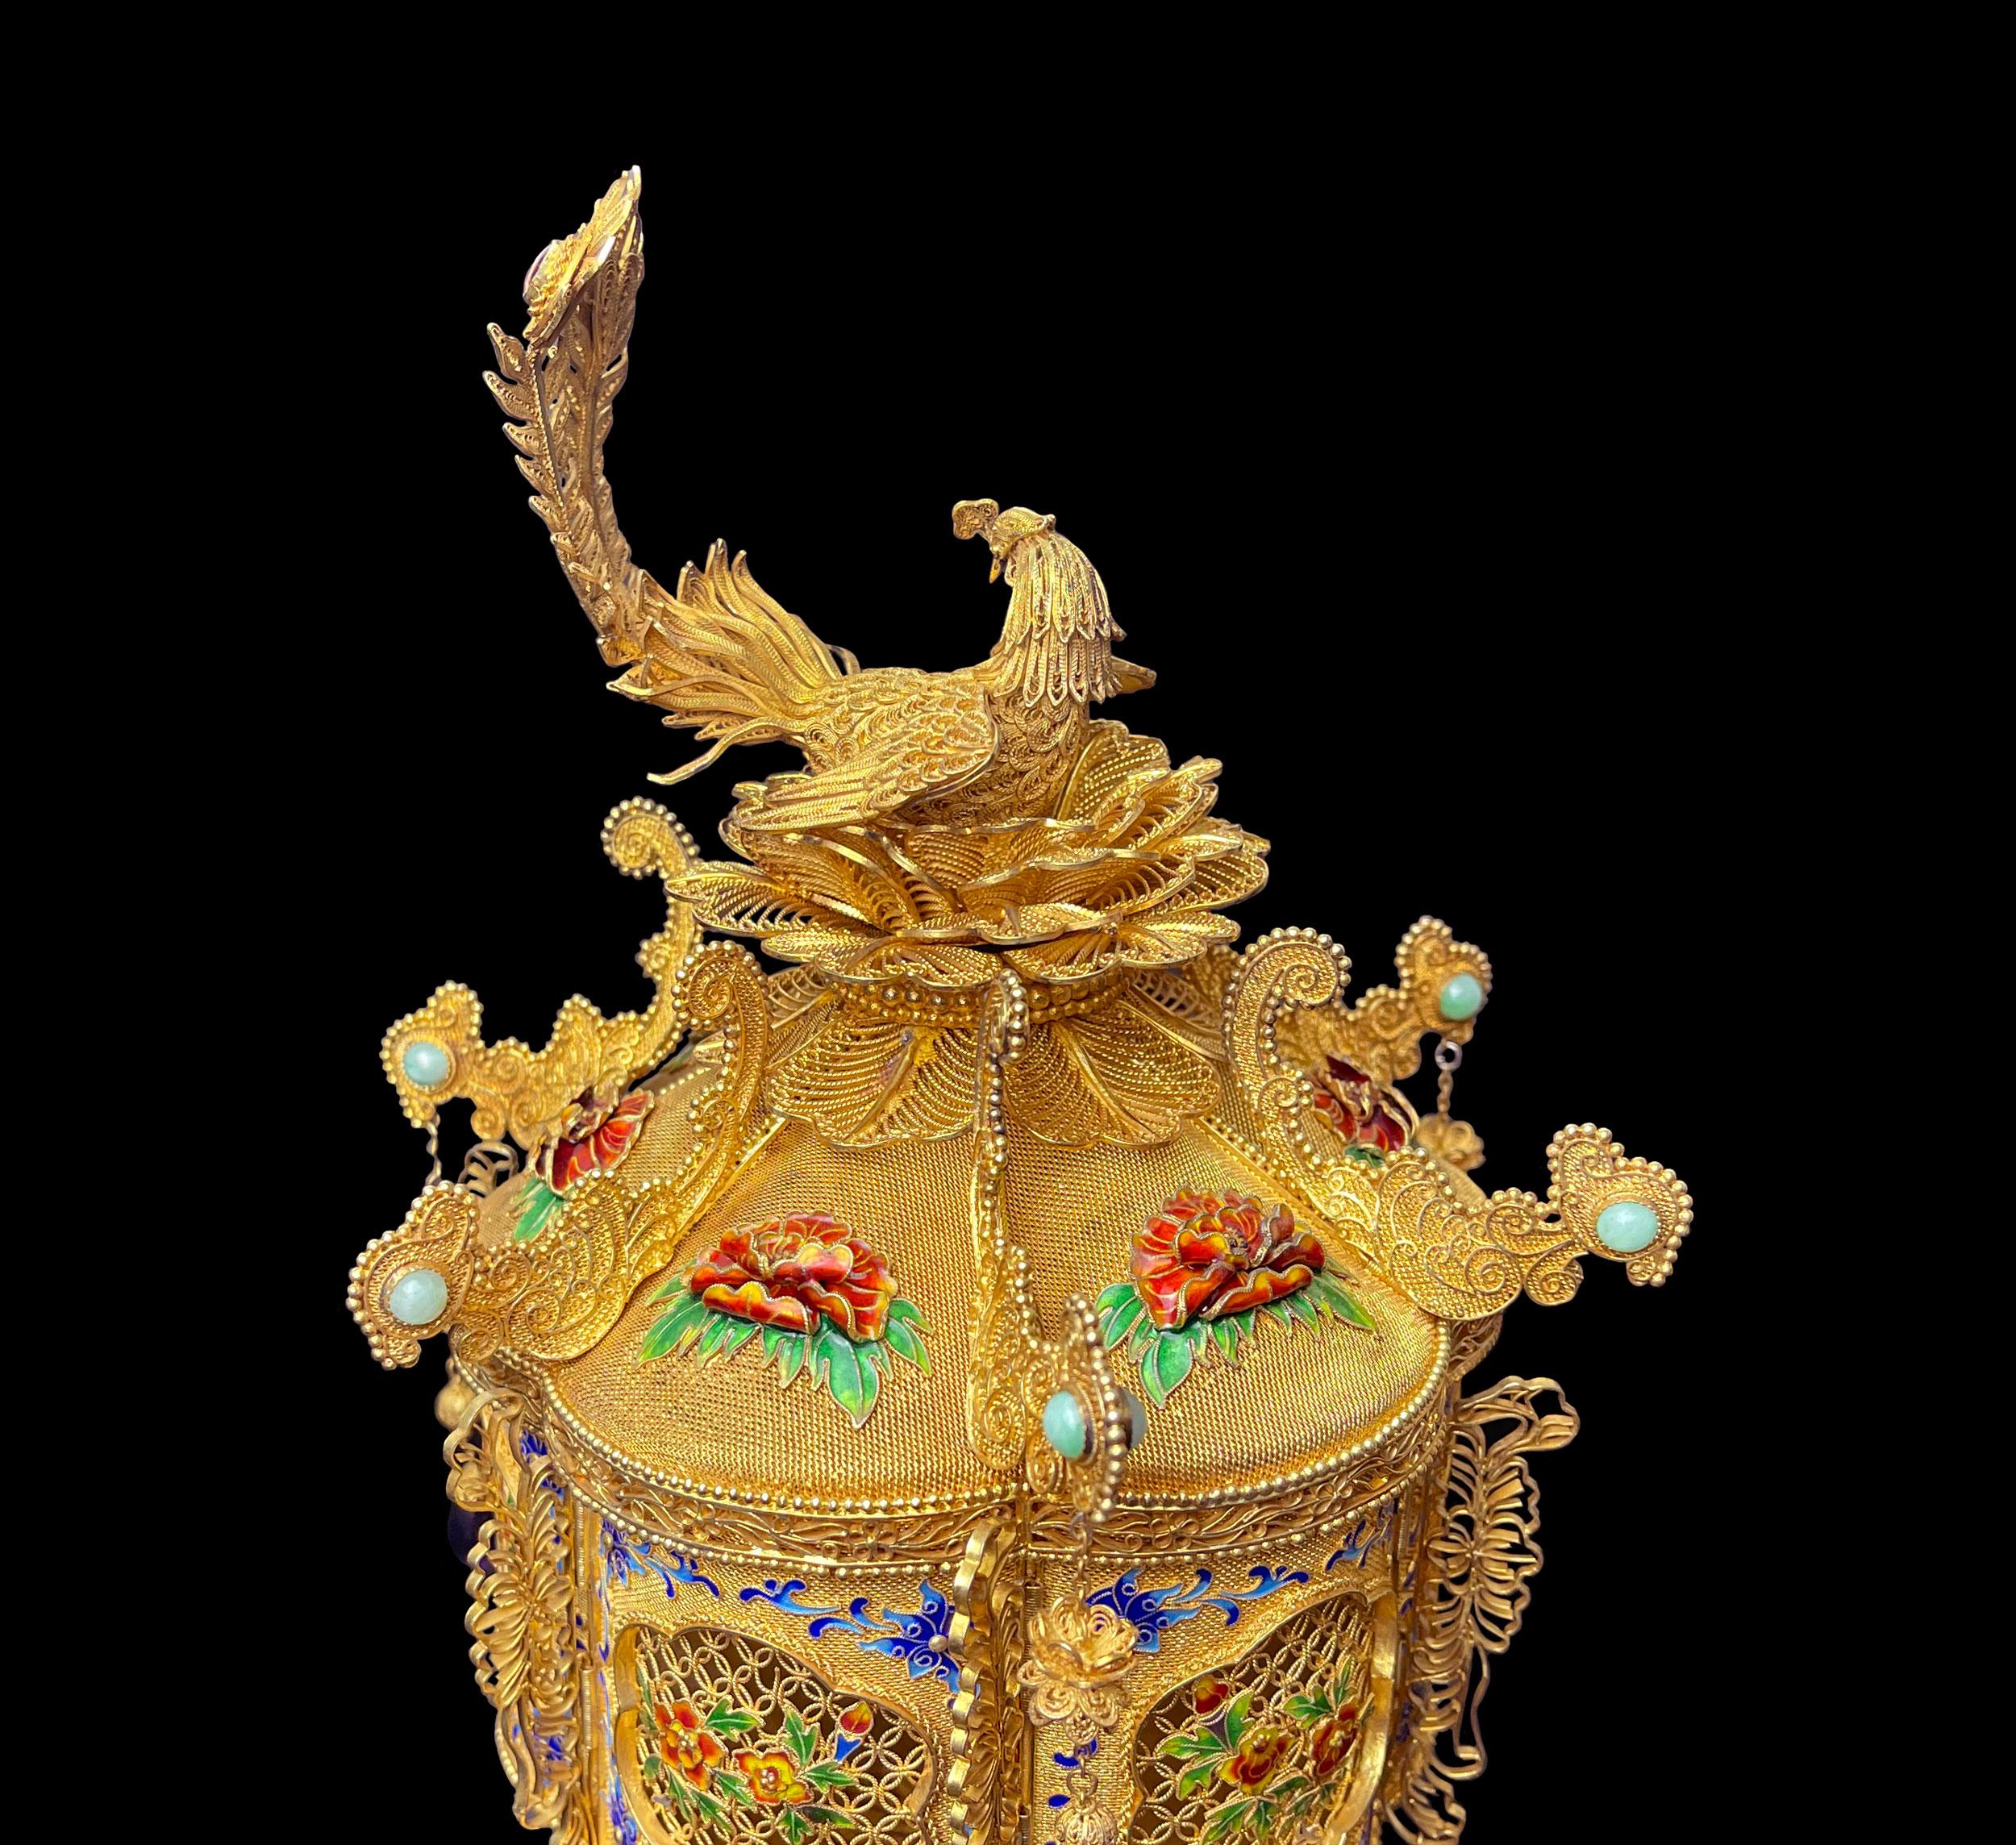 20th Century Chinese Enameled & Jeweled Gilt Silver Filigree Work Potpourri Urn, Circa 1900 For Sale